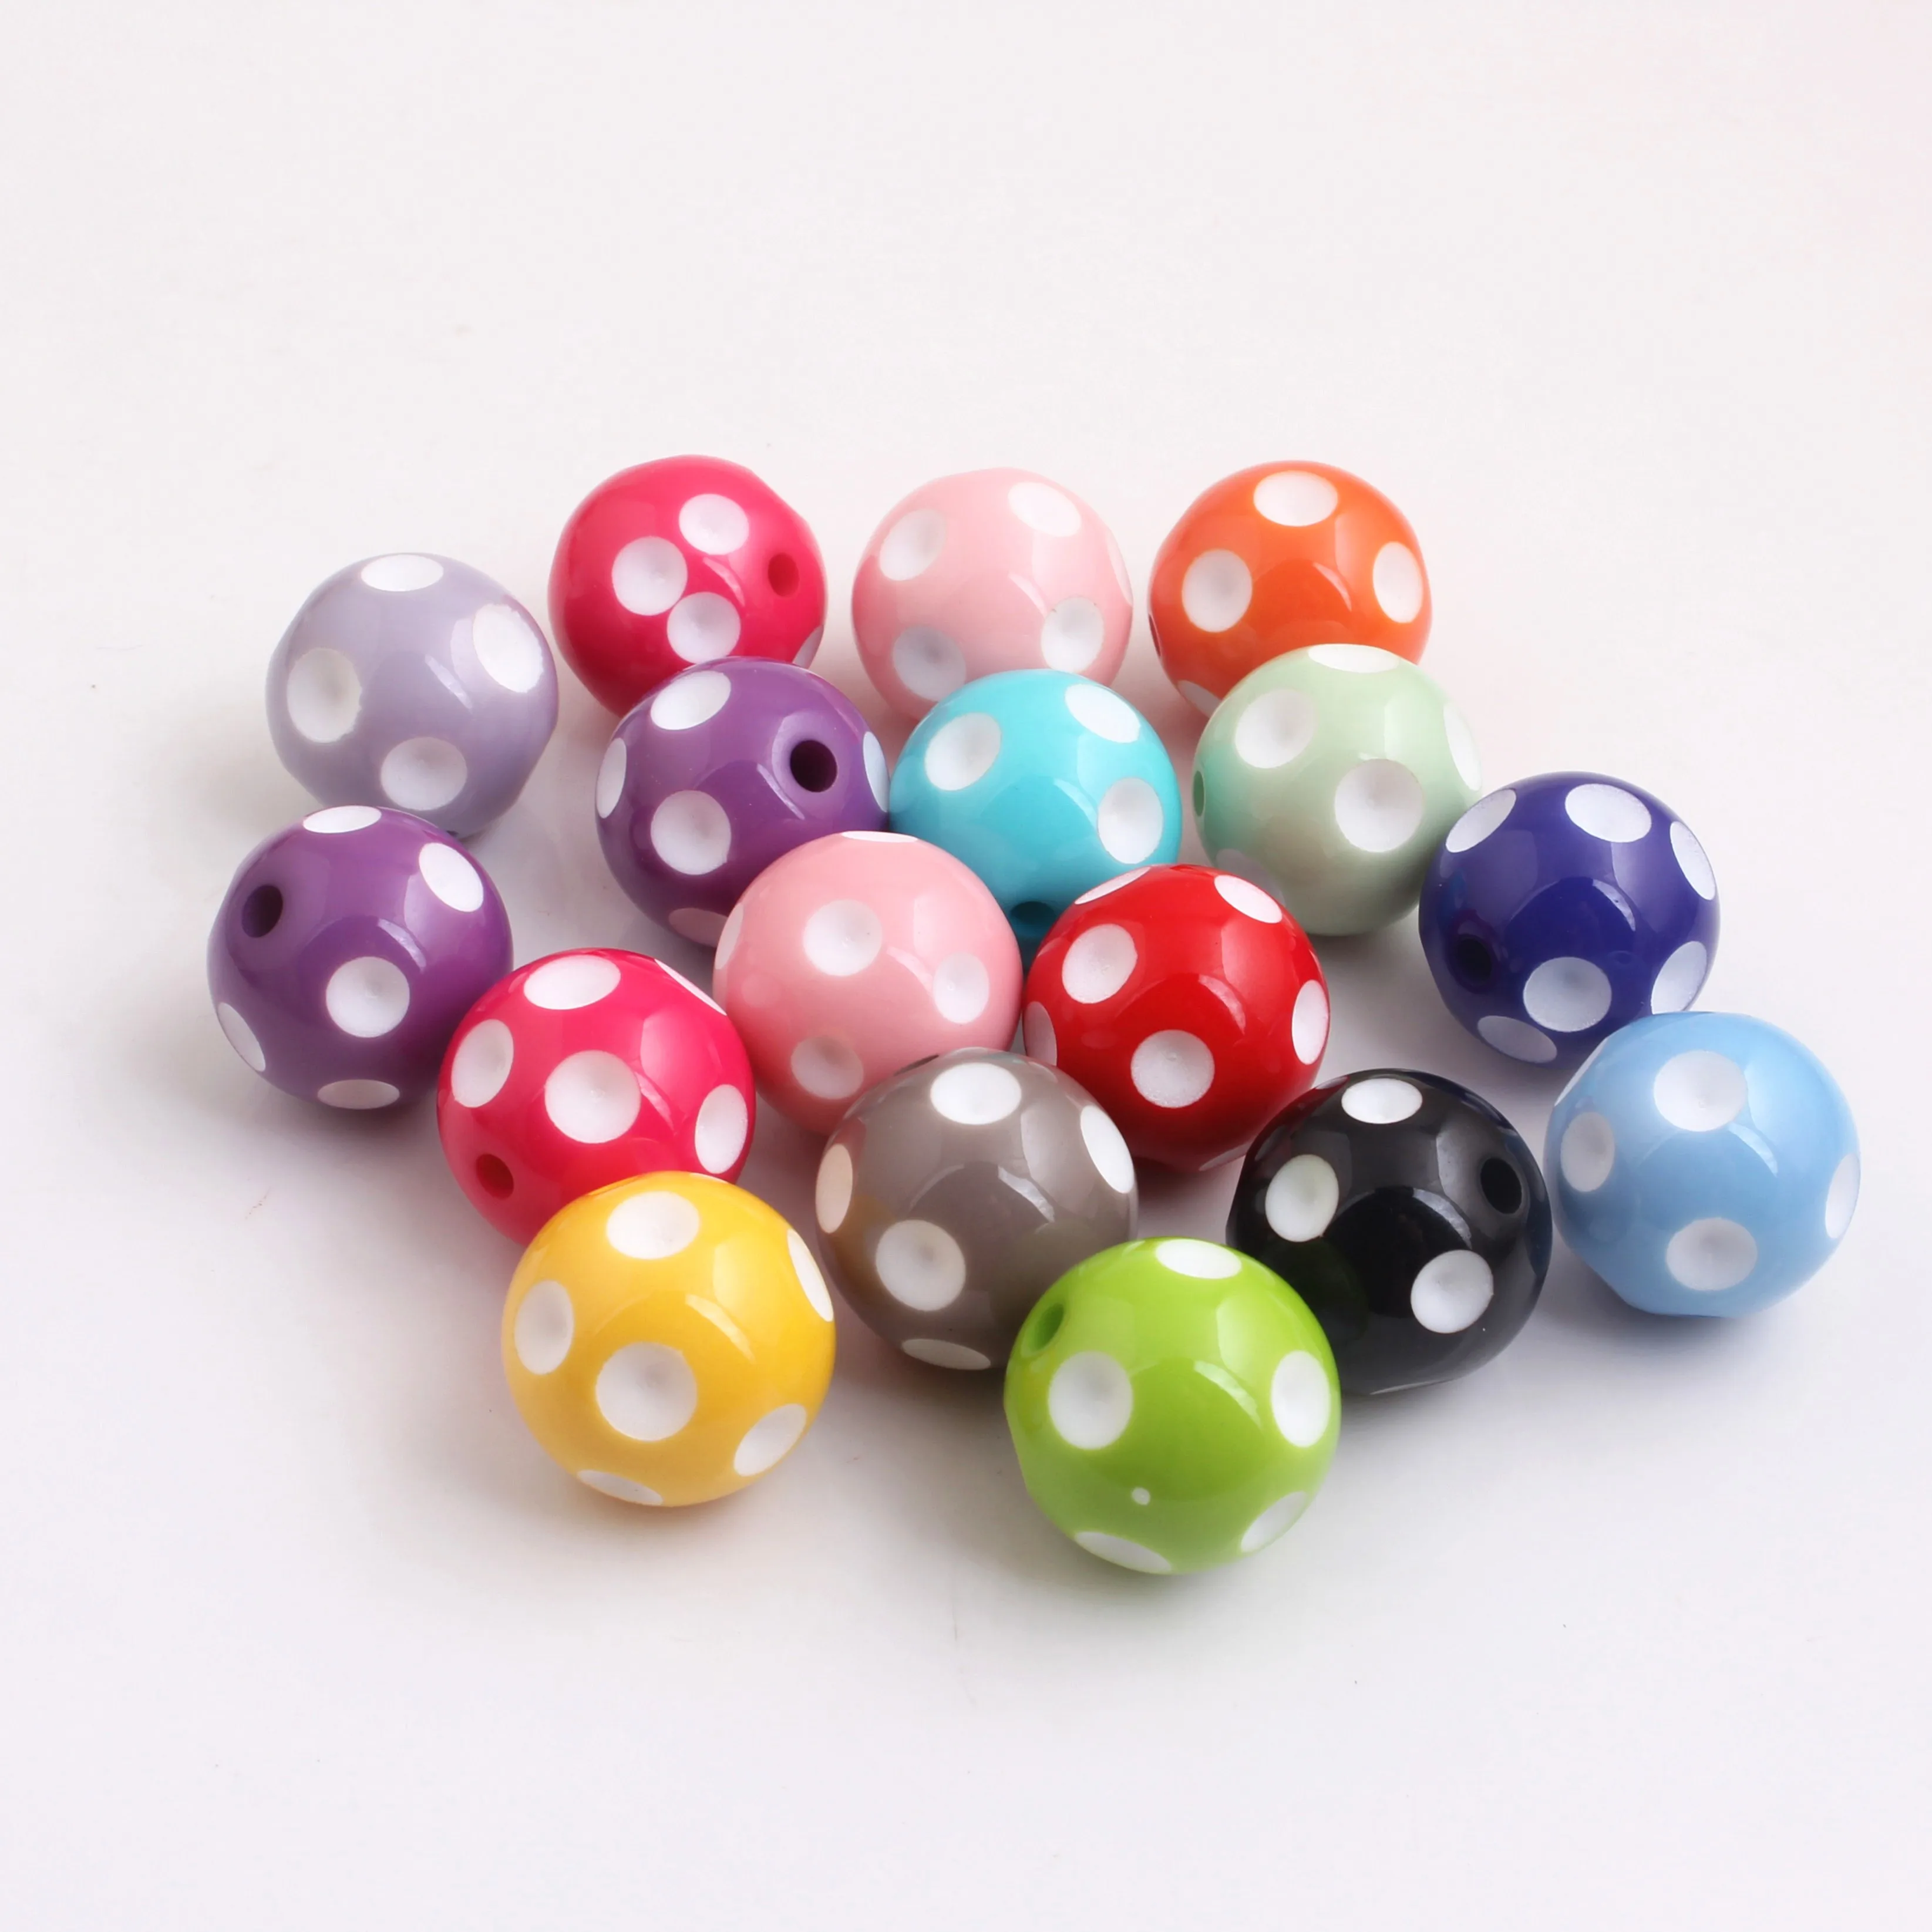 

Wholesales Mixed Colorful Color Bubblegum Beads Polka Dot Beads for Kids Party Accessories 12mm 14mm 16mm